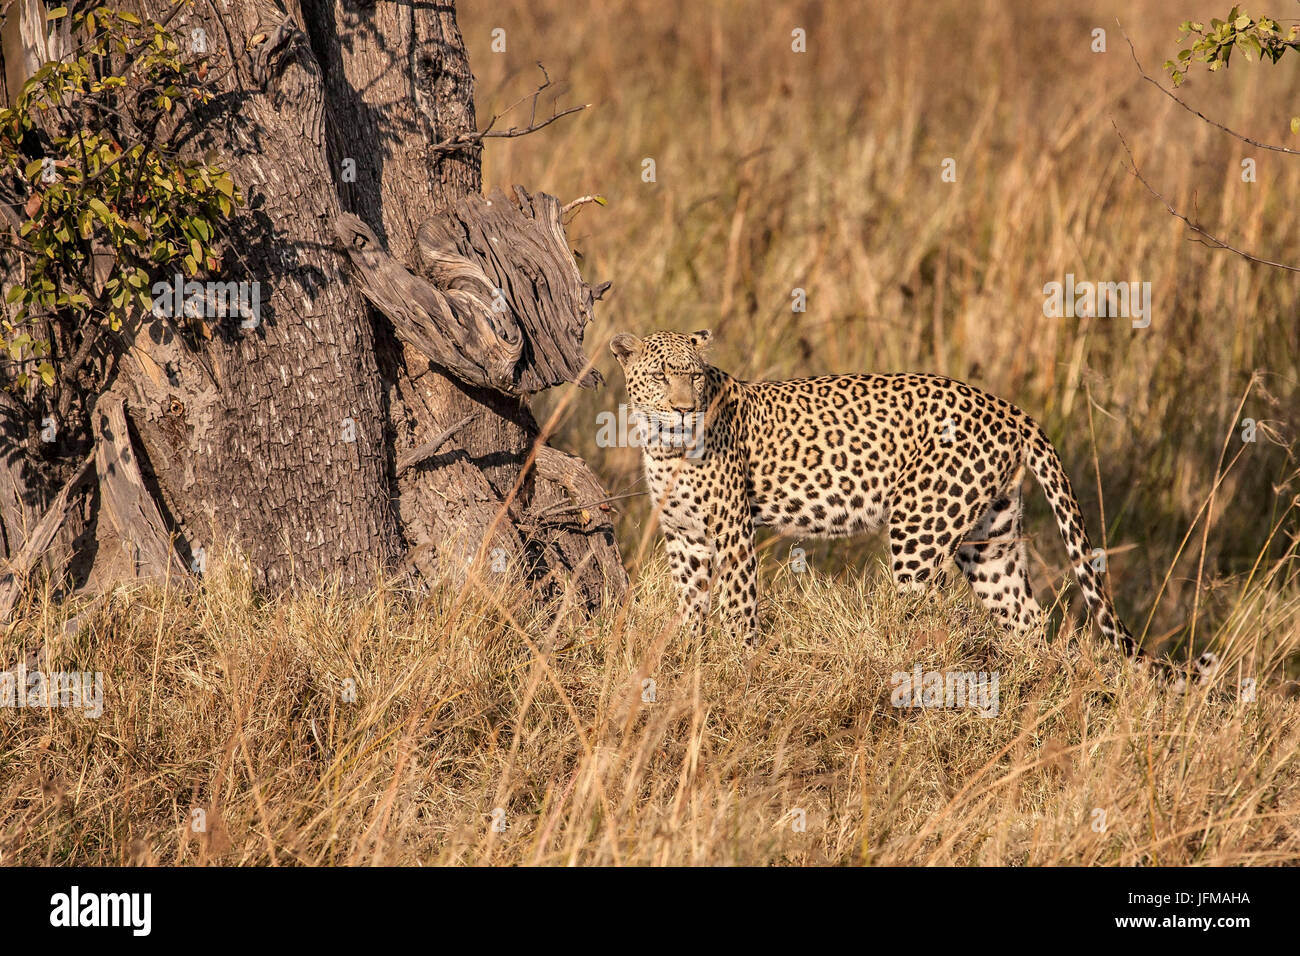 A solitary leopard roaming through the savannah Moremi National Park in Botswana Africa Stock Photo